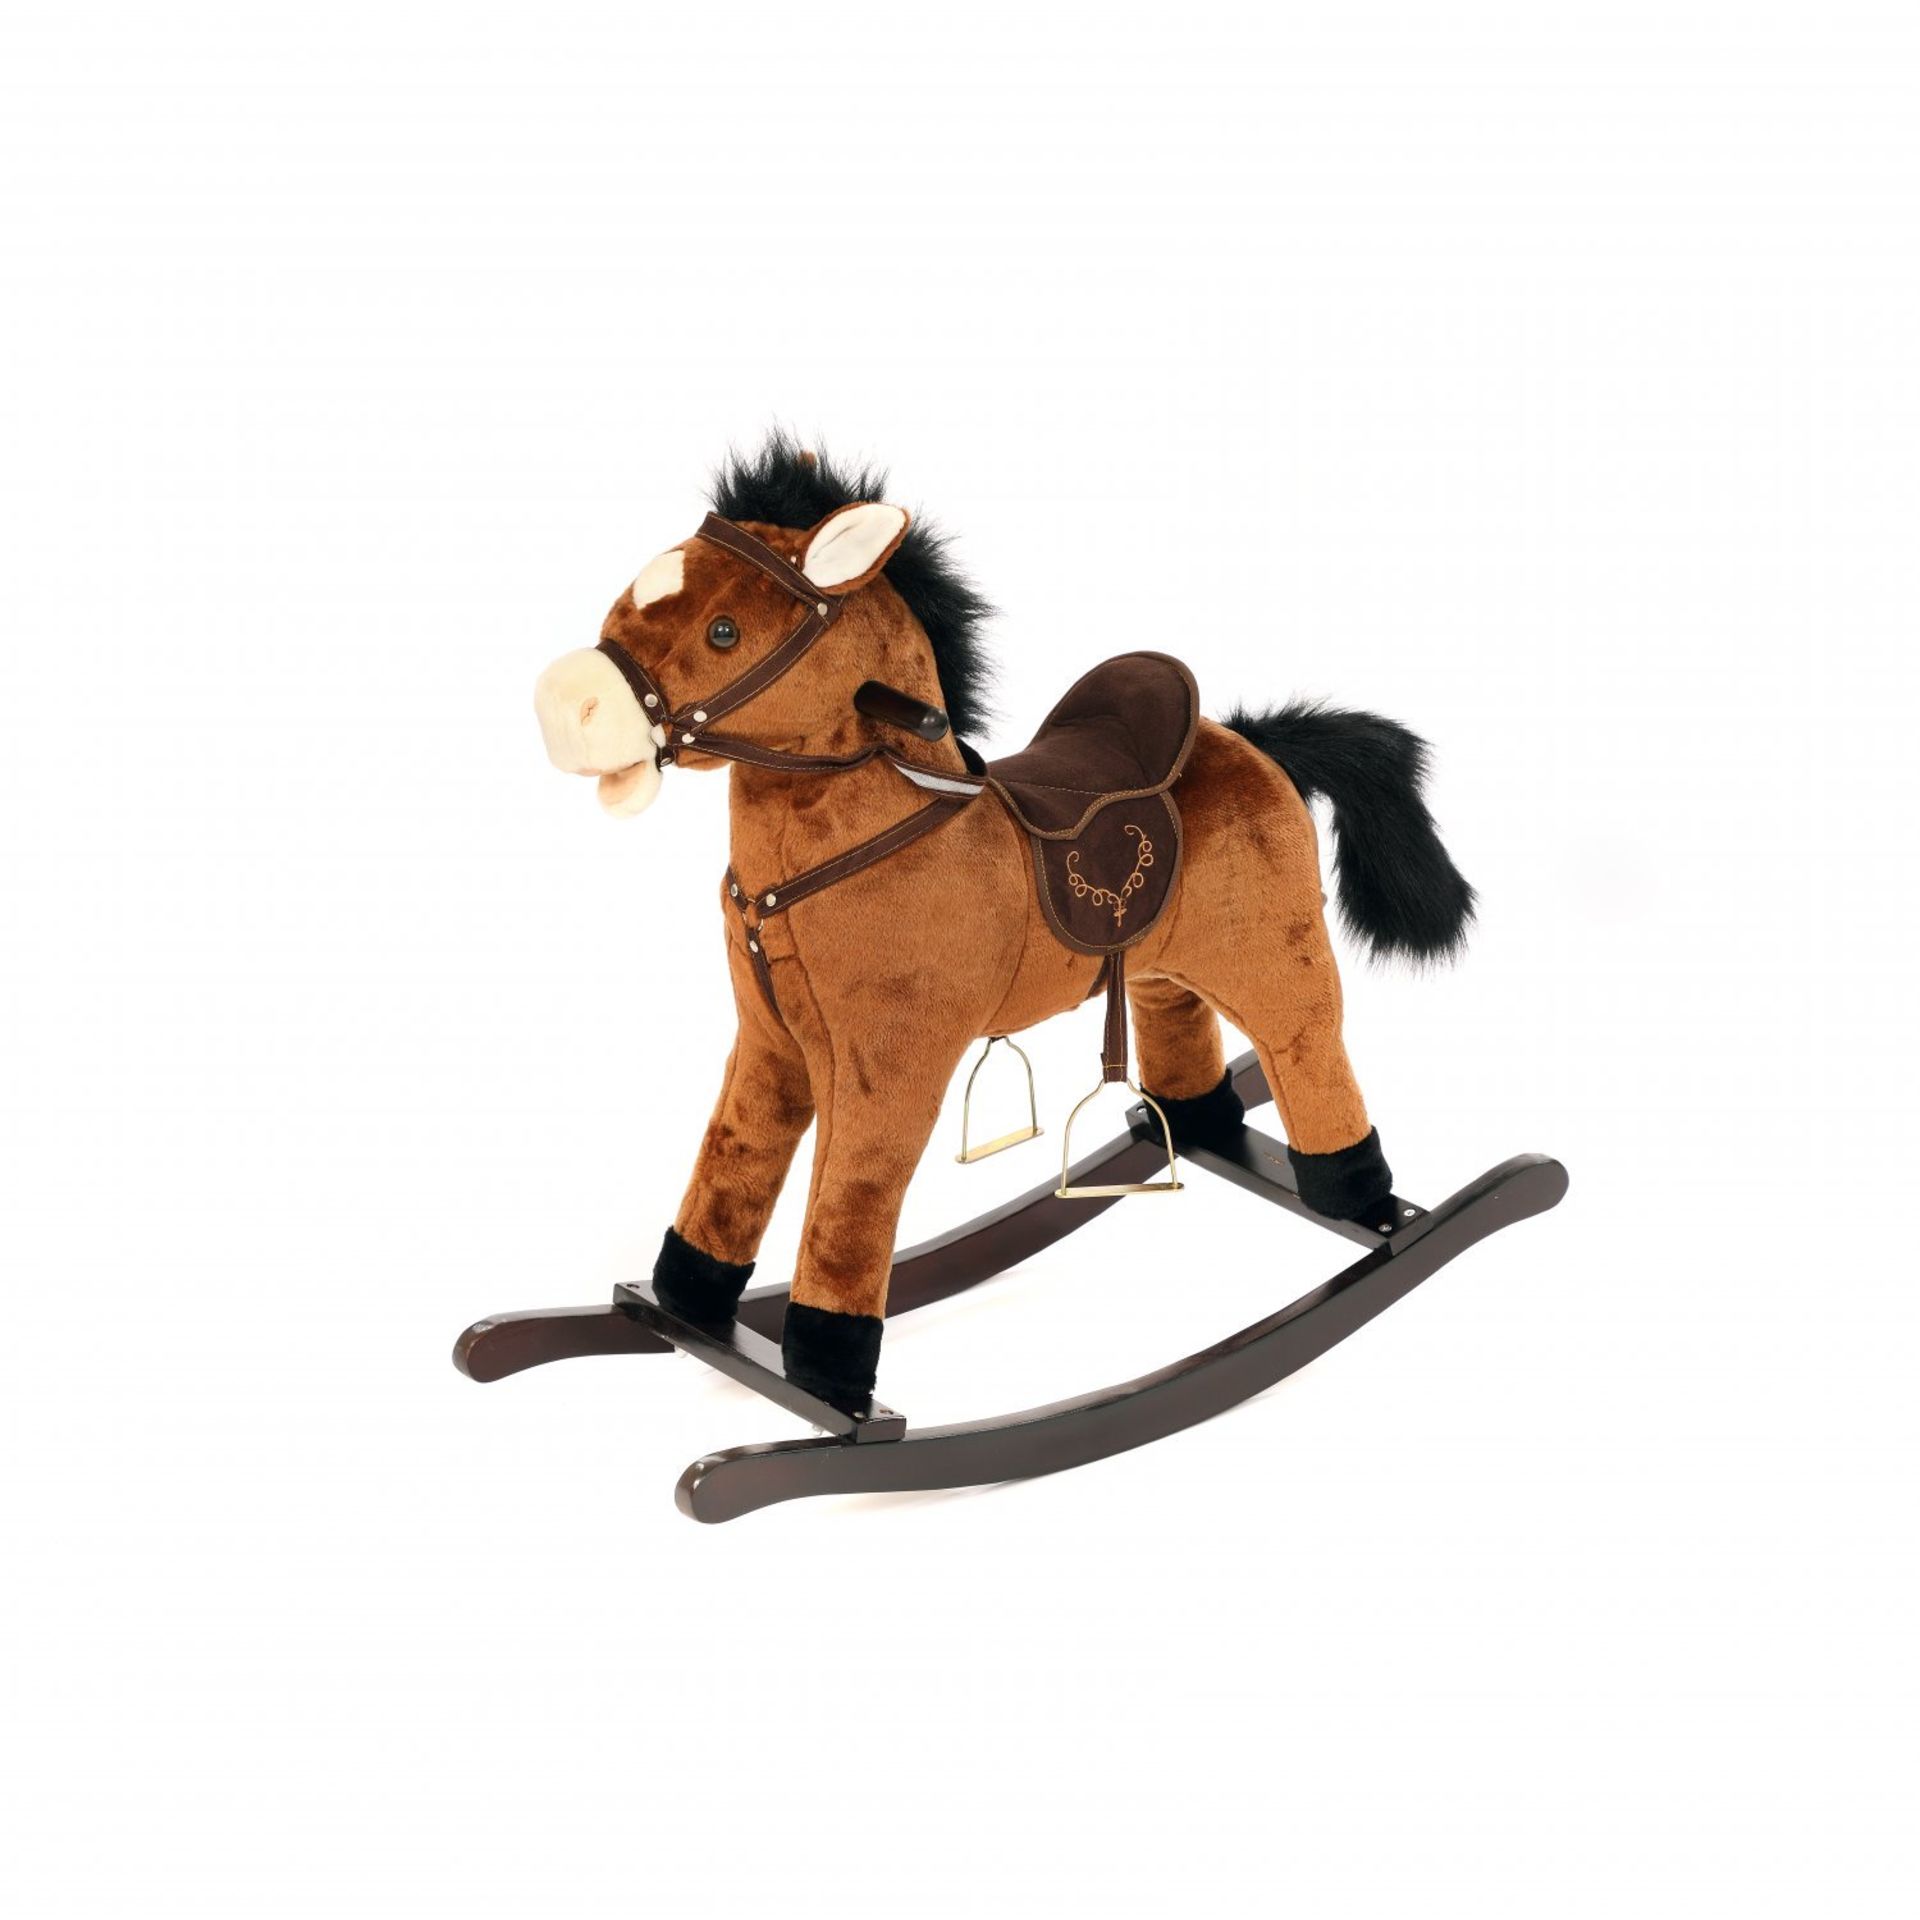 (D19) Childrens Kids Toy Rocking Horse with Neighing Sound Dimensions: 74 x 21 x 53cm High Qu...